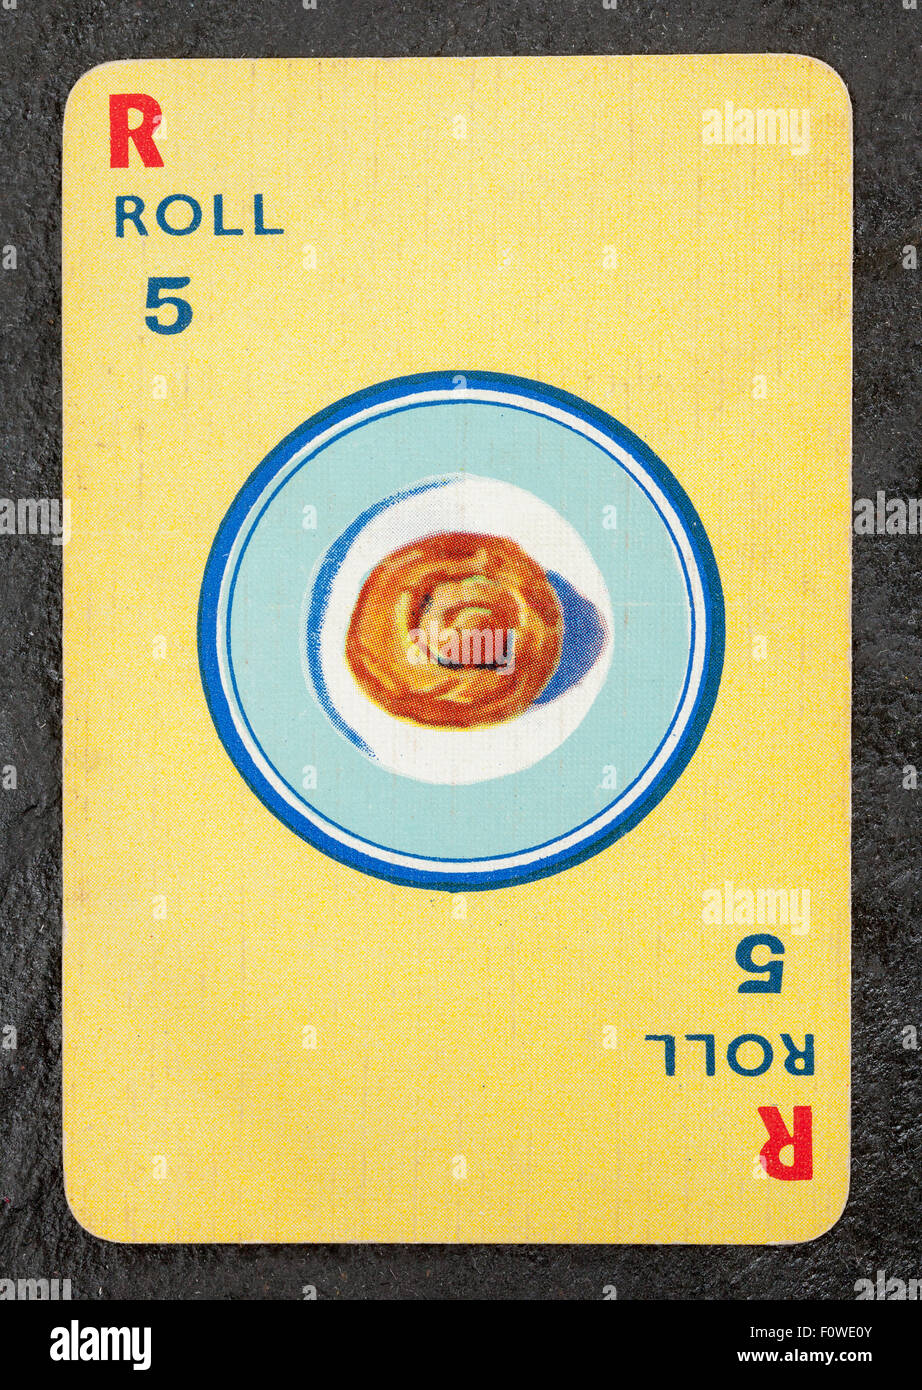 Bread Roll Playing Card from a vintage pack of Menuette Stock Photo